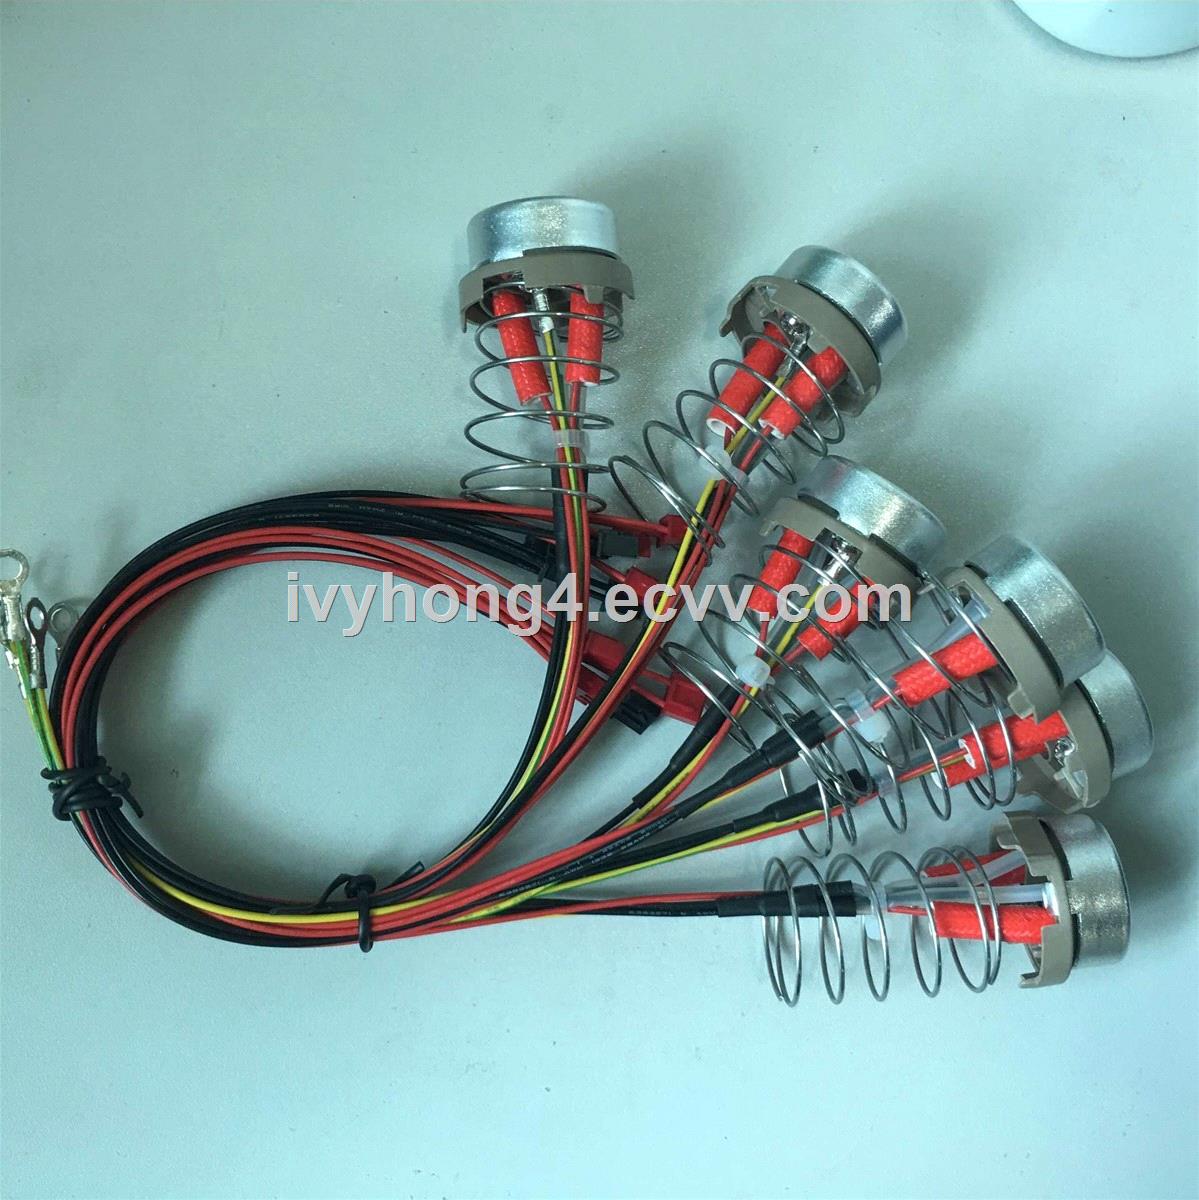 Electric Cooker used NTC thermistor Temperature Sensor Listed company Stock Code 002759